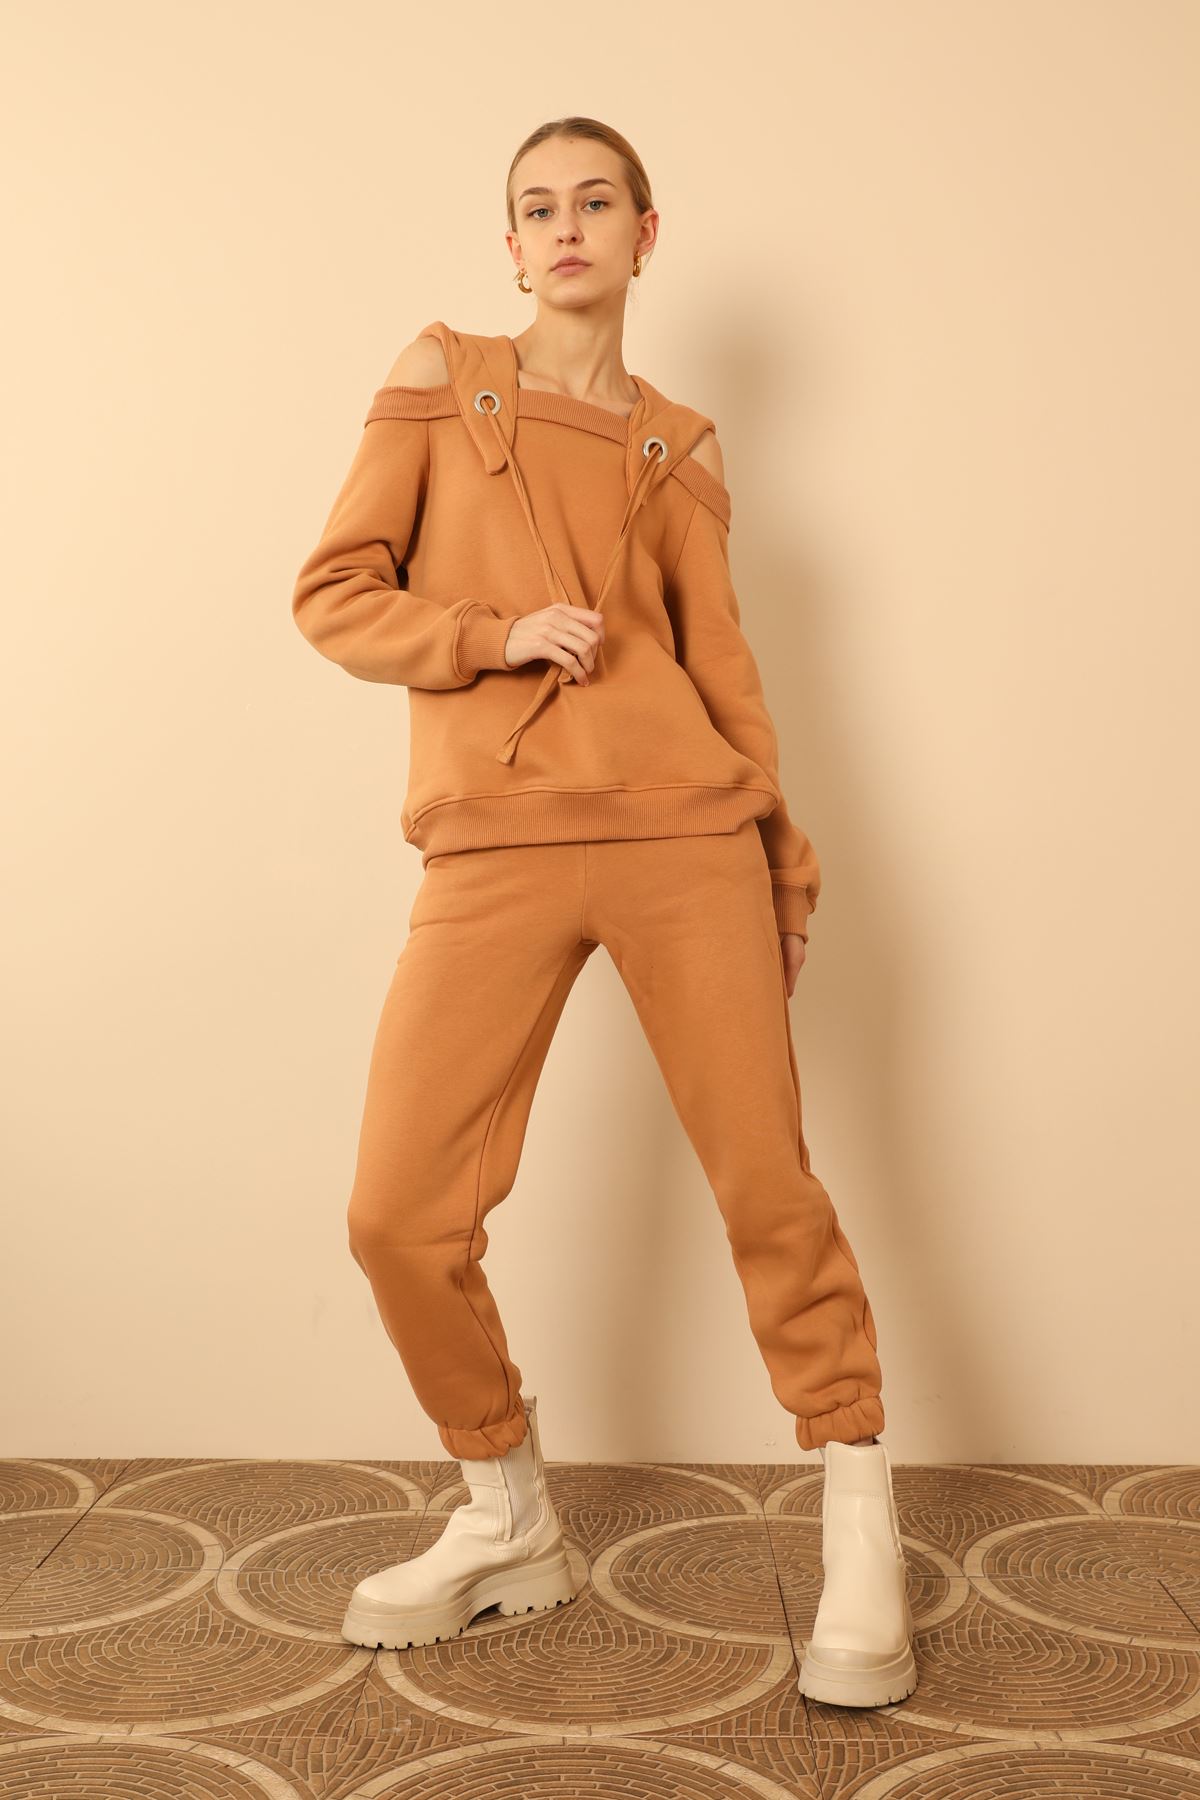 Third Knit With Wool İnside Fabric Hooded Hip Height Shoulder Detailed Women Sweatshirt - Light Brown